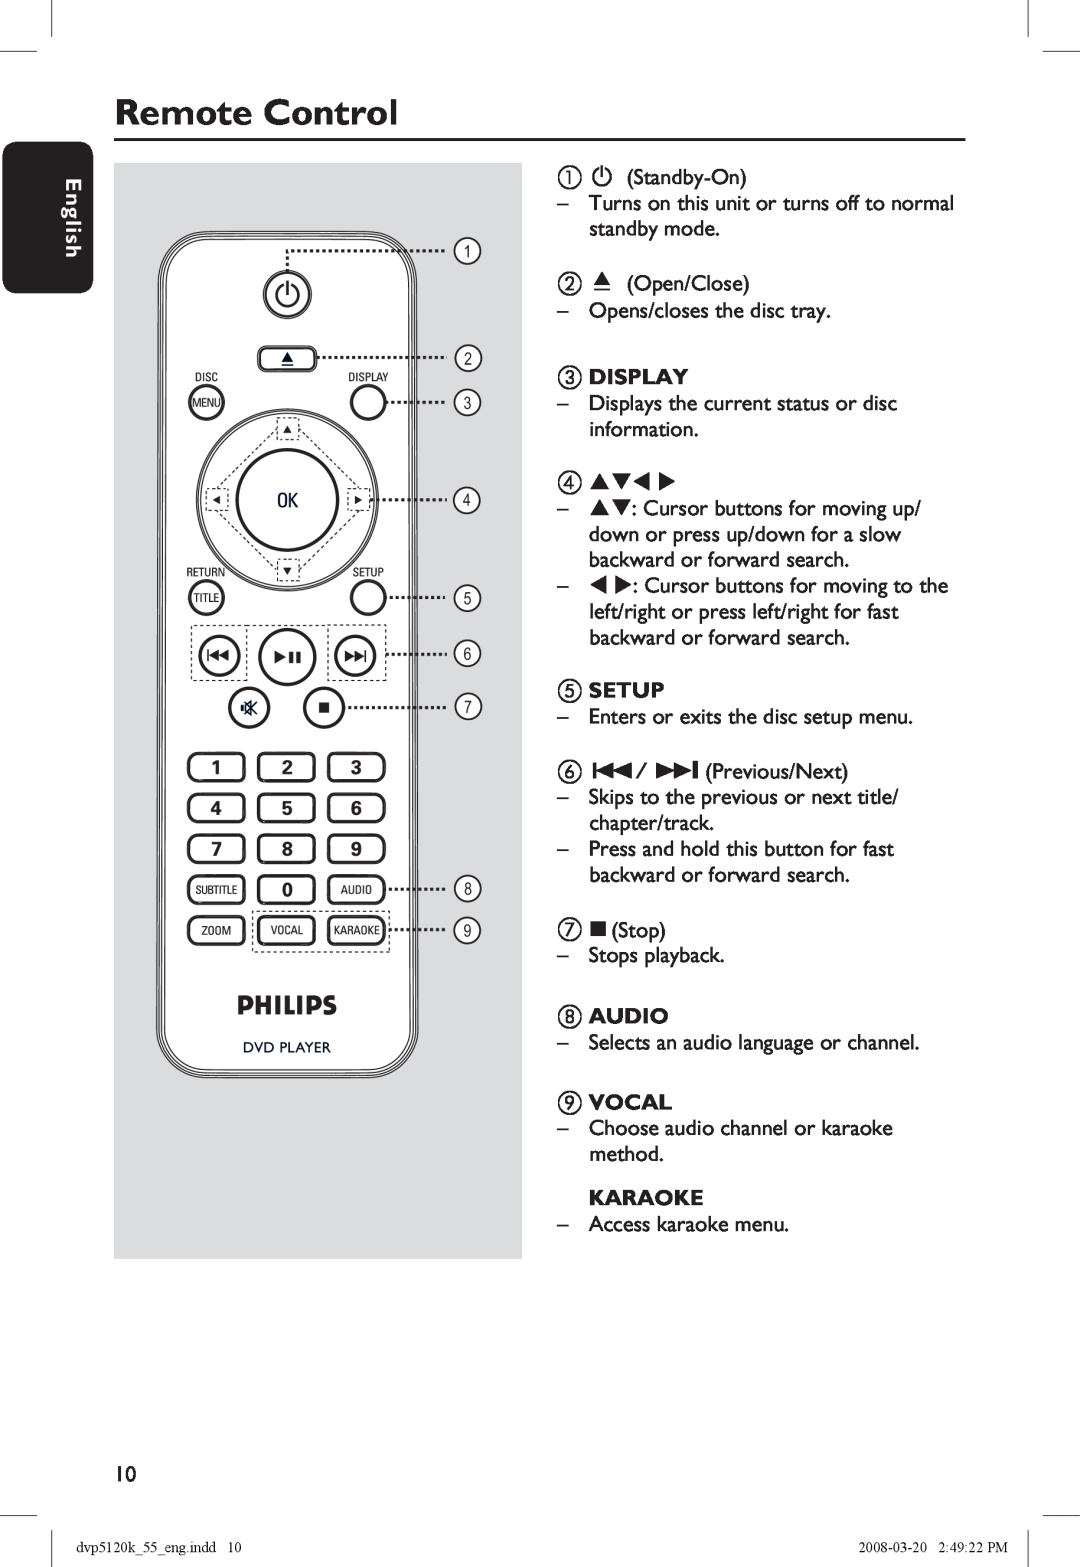 Philips DVP5120KX/78 manual Remote Control, C Display, E Setup, Skips to the previous or next title/ chapter/track, H Audio 